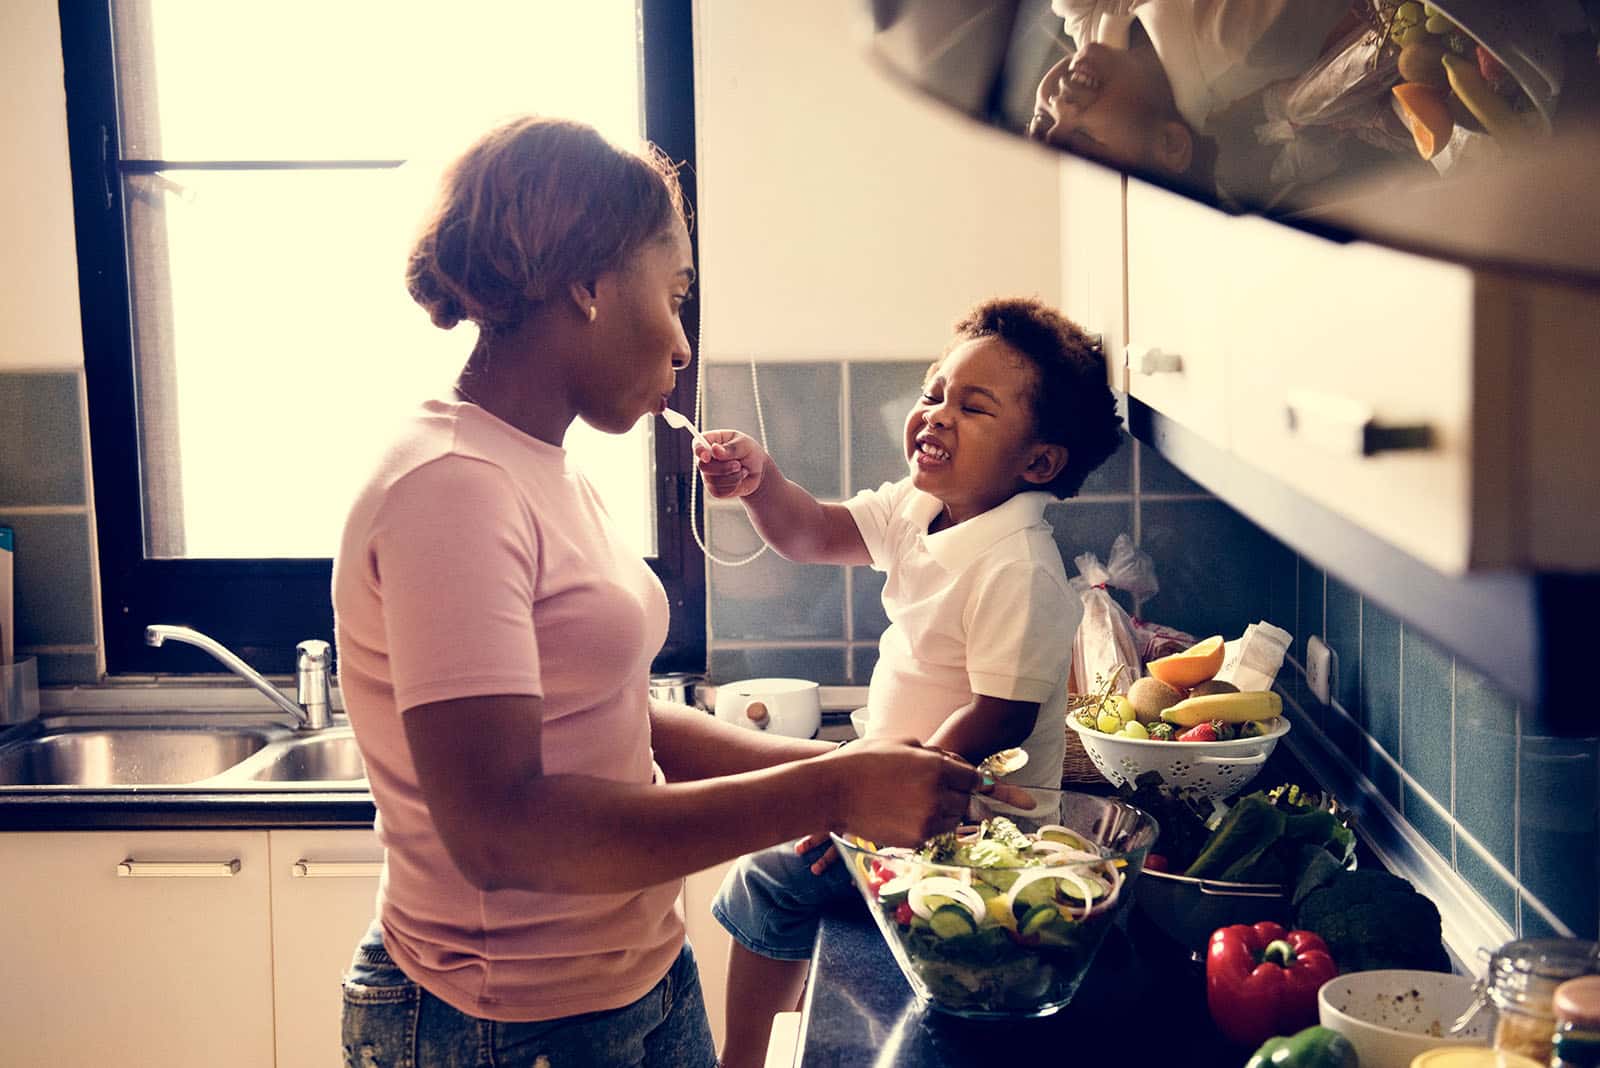 A woman with dark toned skin is preparing a salad in her kitchen, she is wering a pink t-shirt. On the counter next to her is a toddler, making a big smile and feeding her from a fork. 